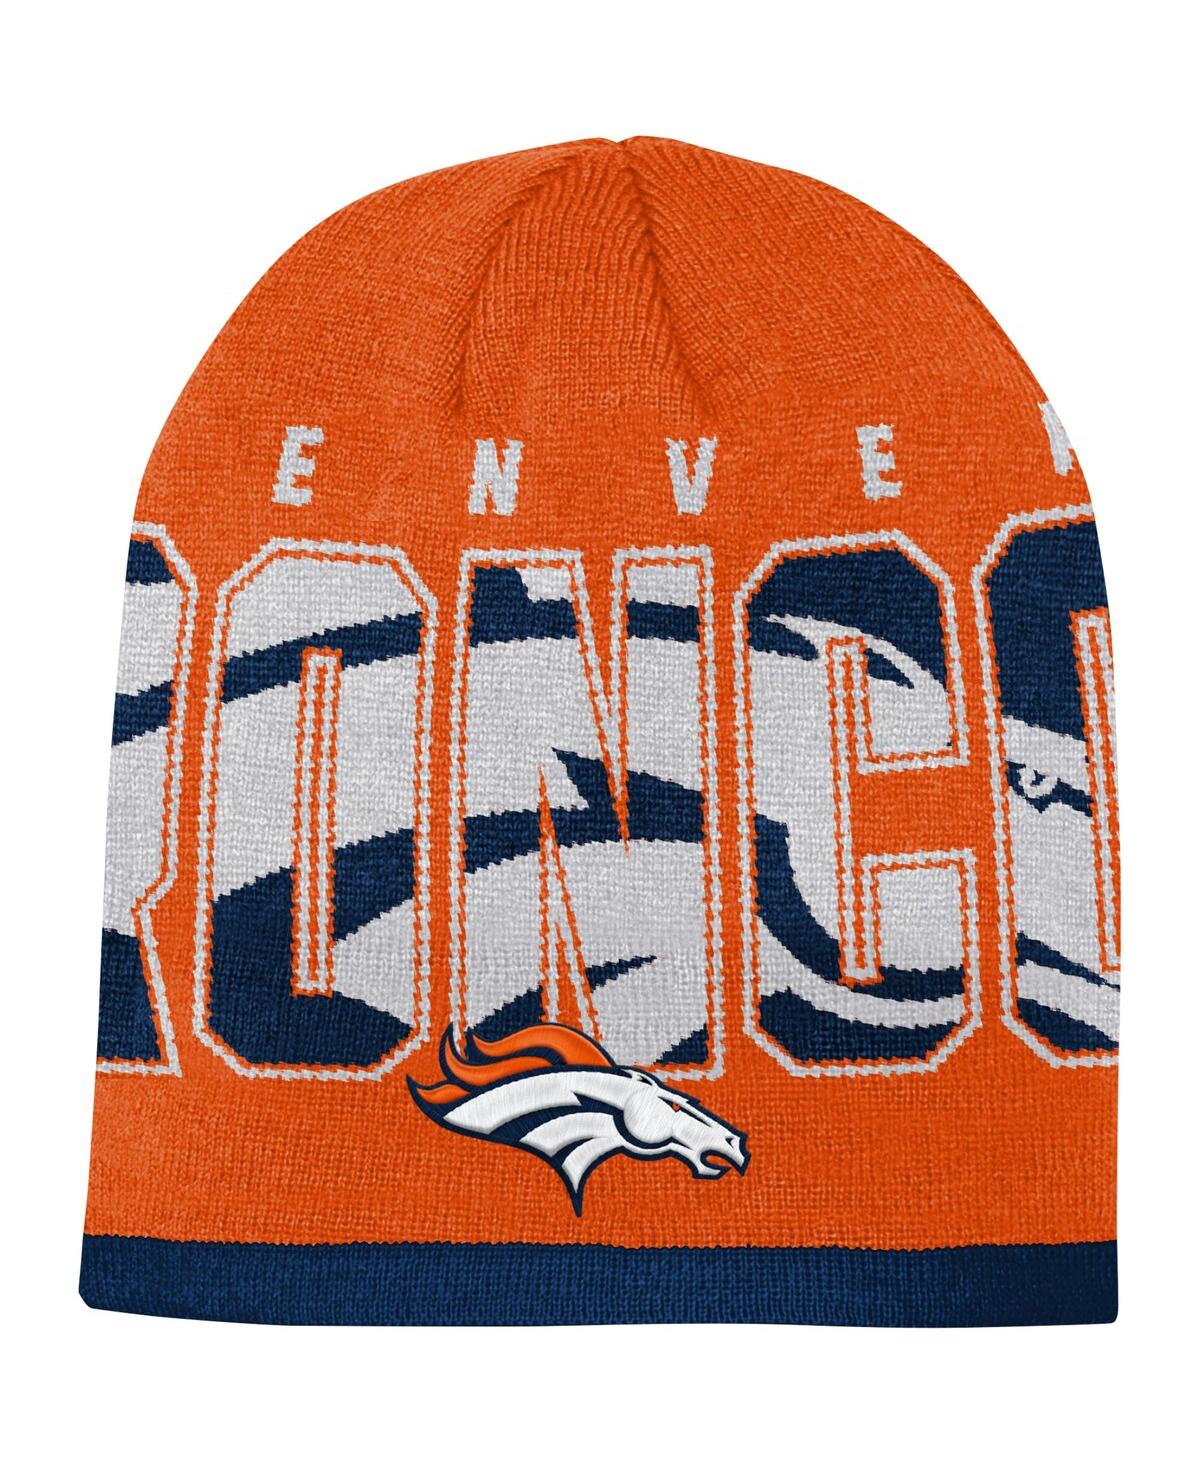 Outerstuff Kids' Youth Boys And Girls Orange Denver Broncos Legacy Beanie